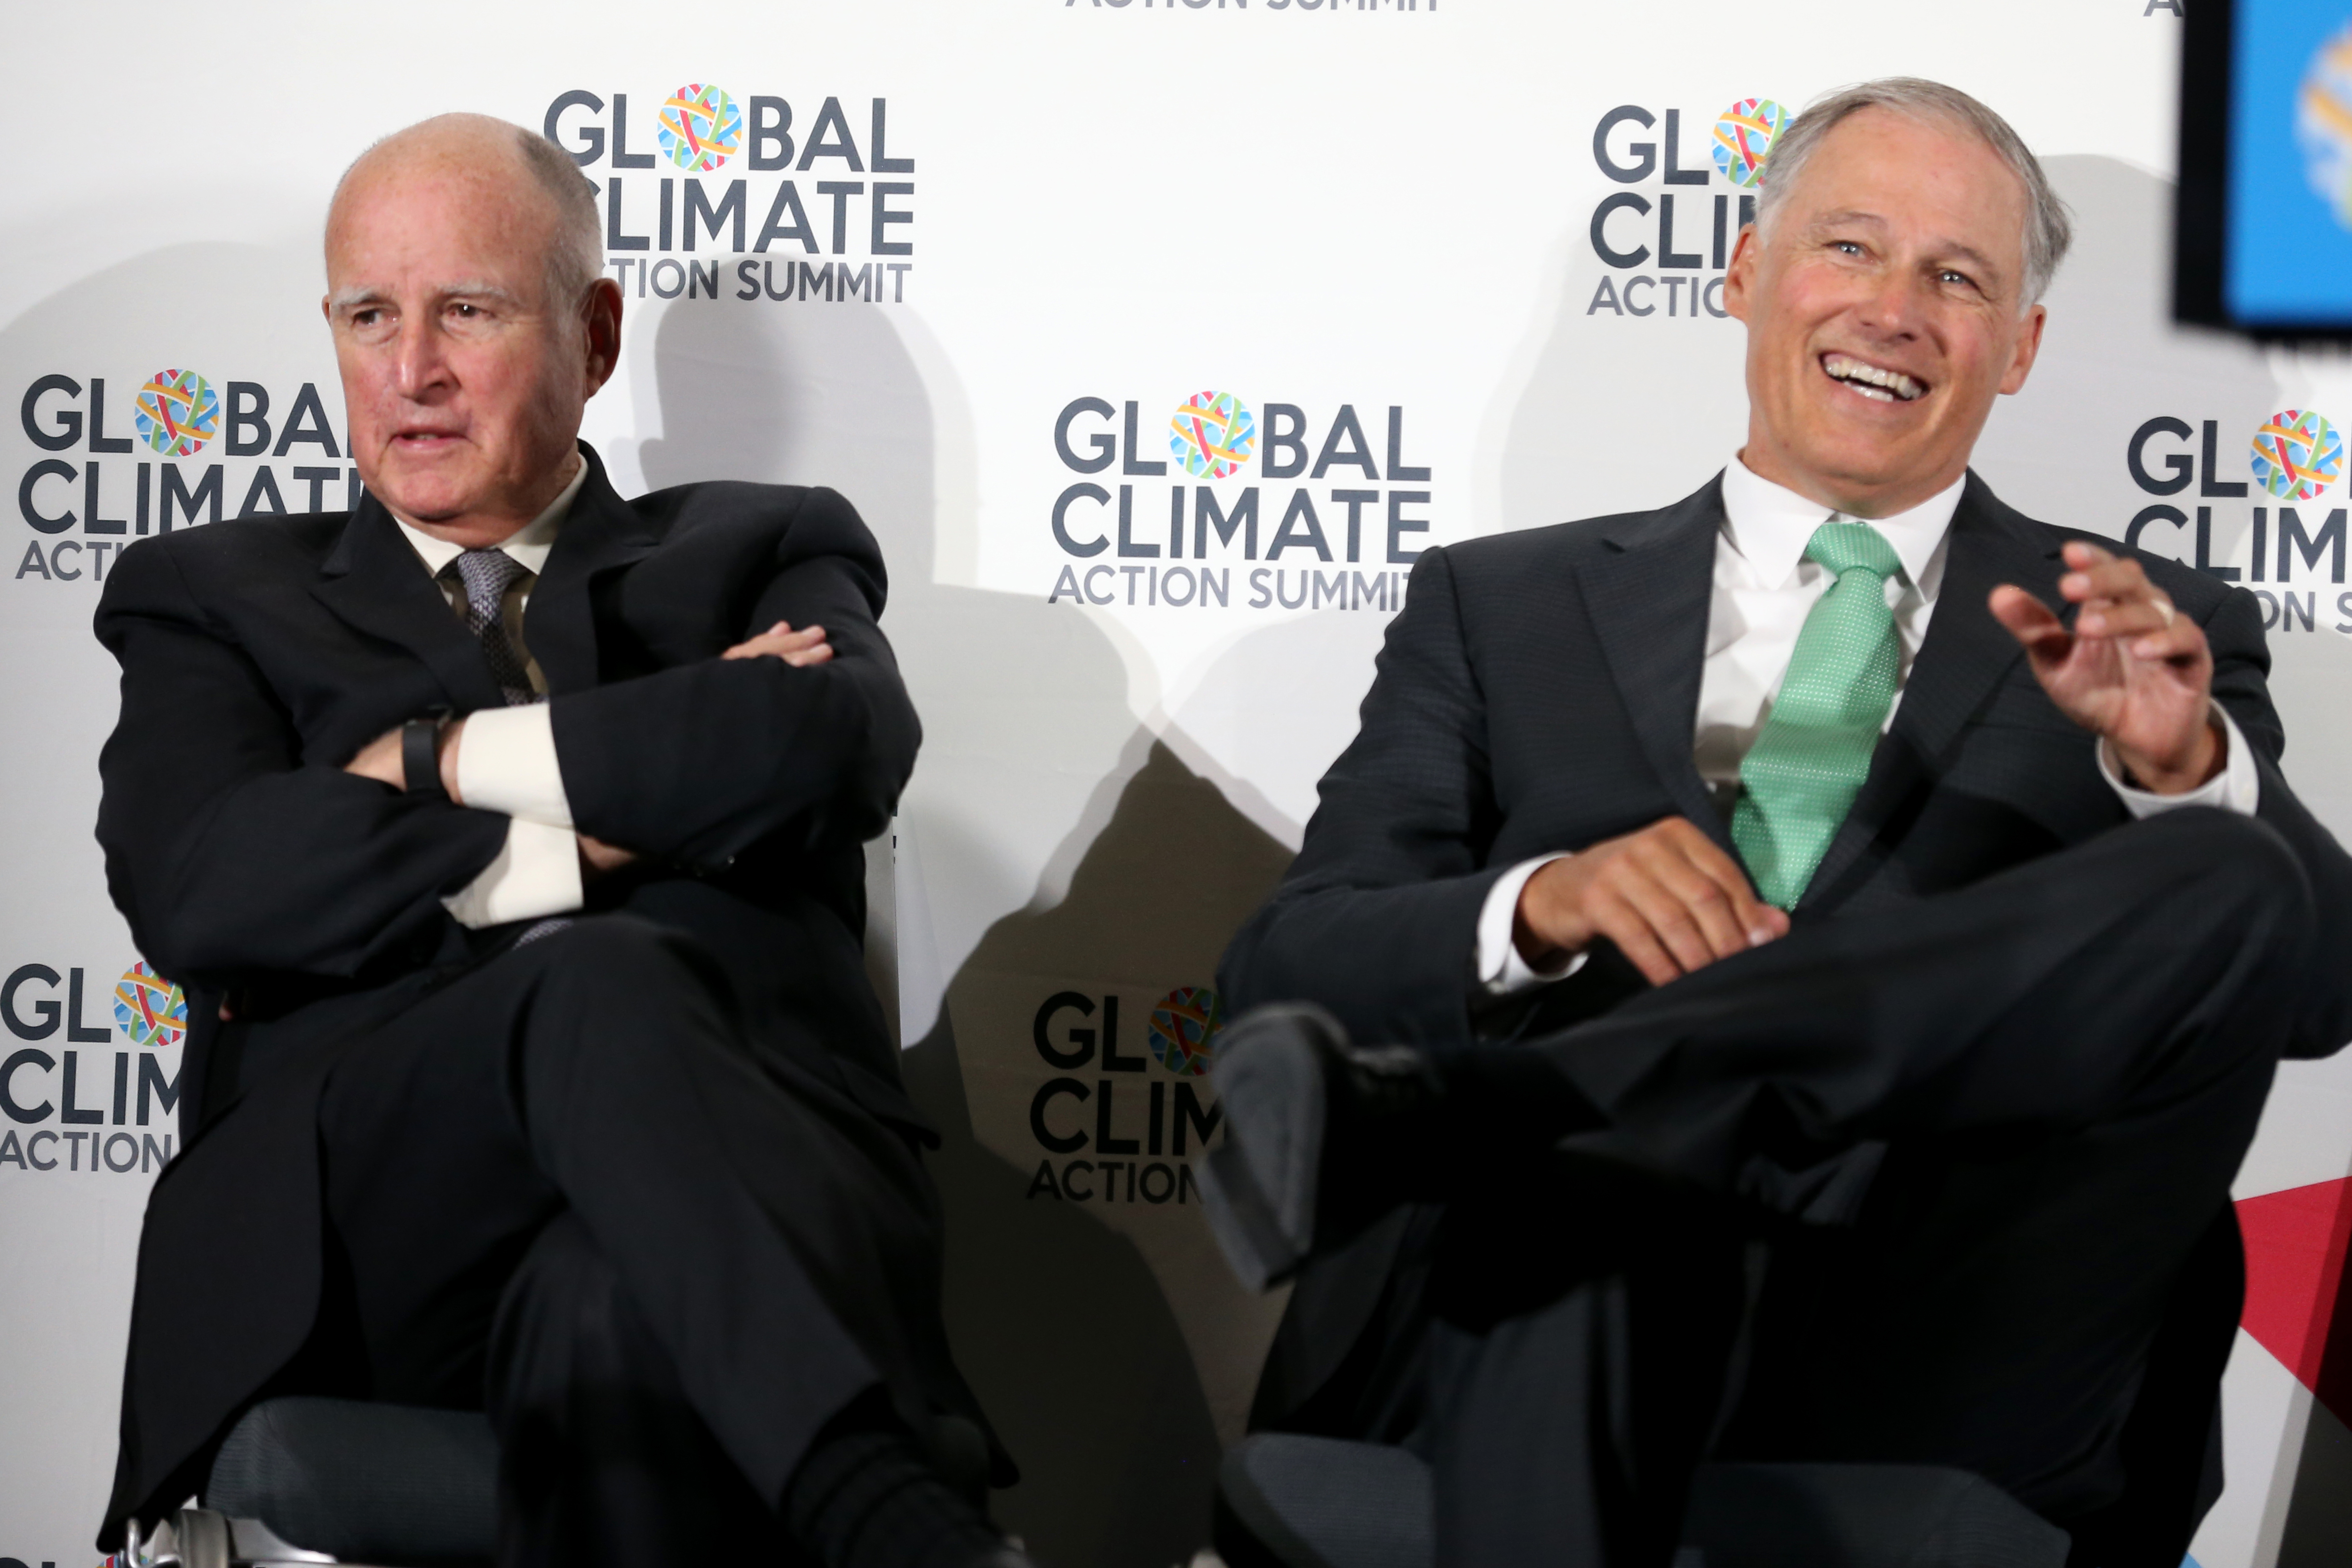 Governors Jerry Brown of California and Jay Inslee of Washington at the Global Climate Action Summit